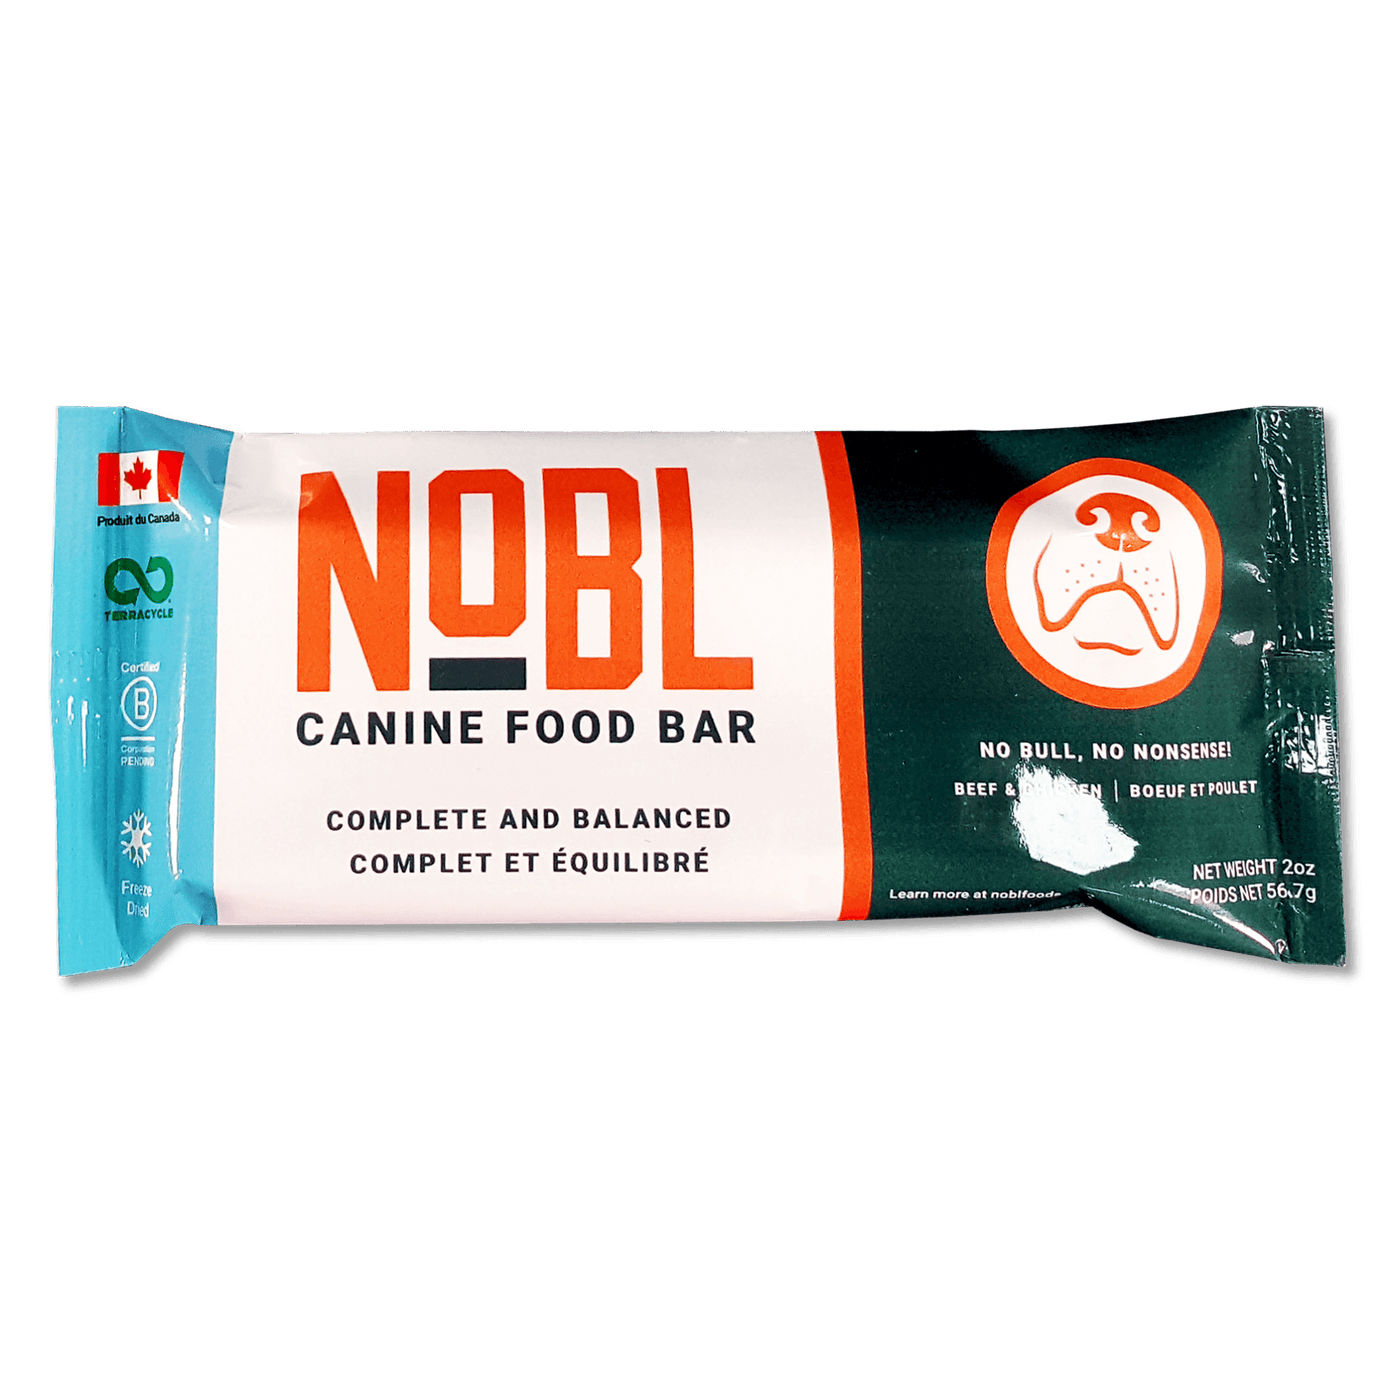 NOBL Adult Canine Food Bars - Beef and Chicken